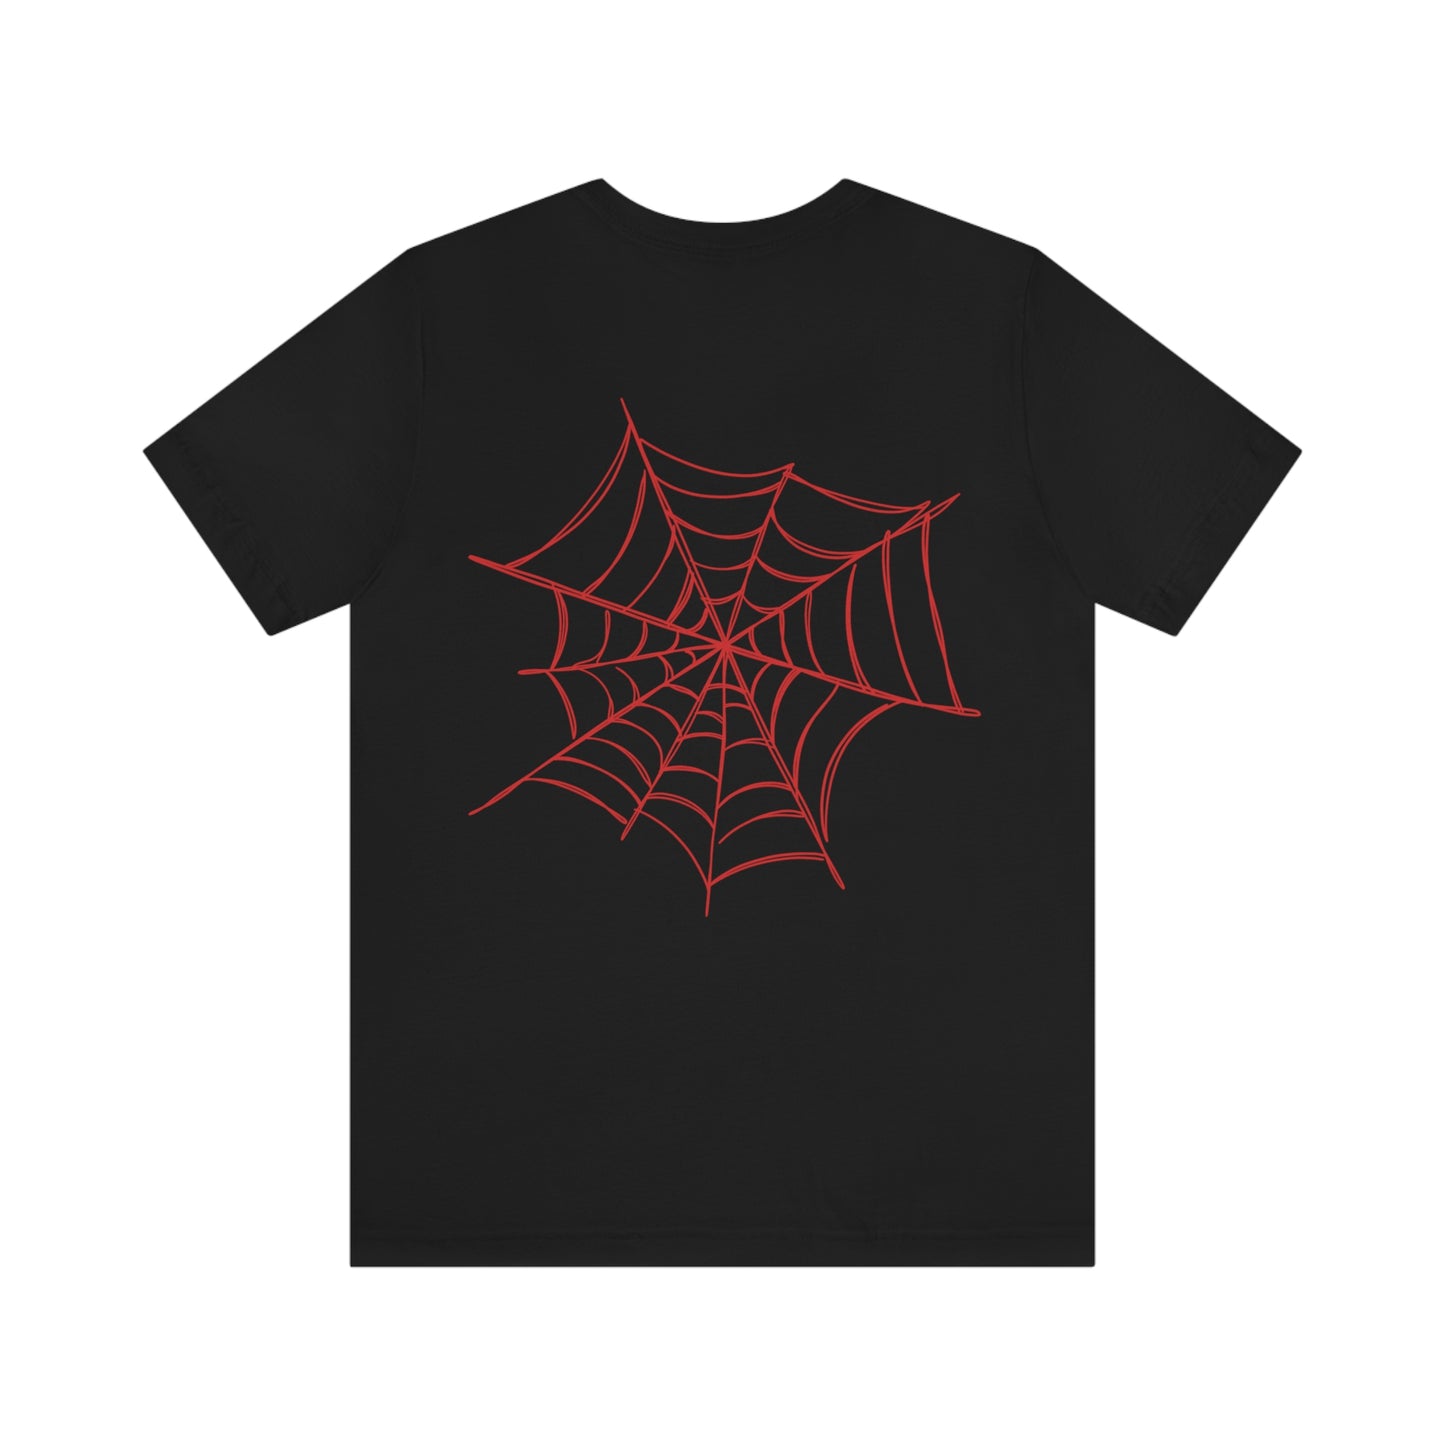 Terry Anderson: T5 (Spider) Tee